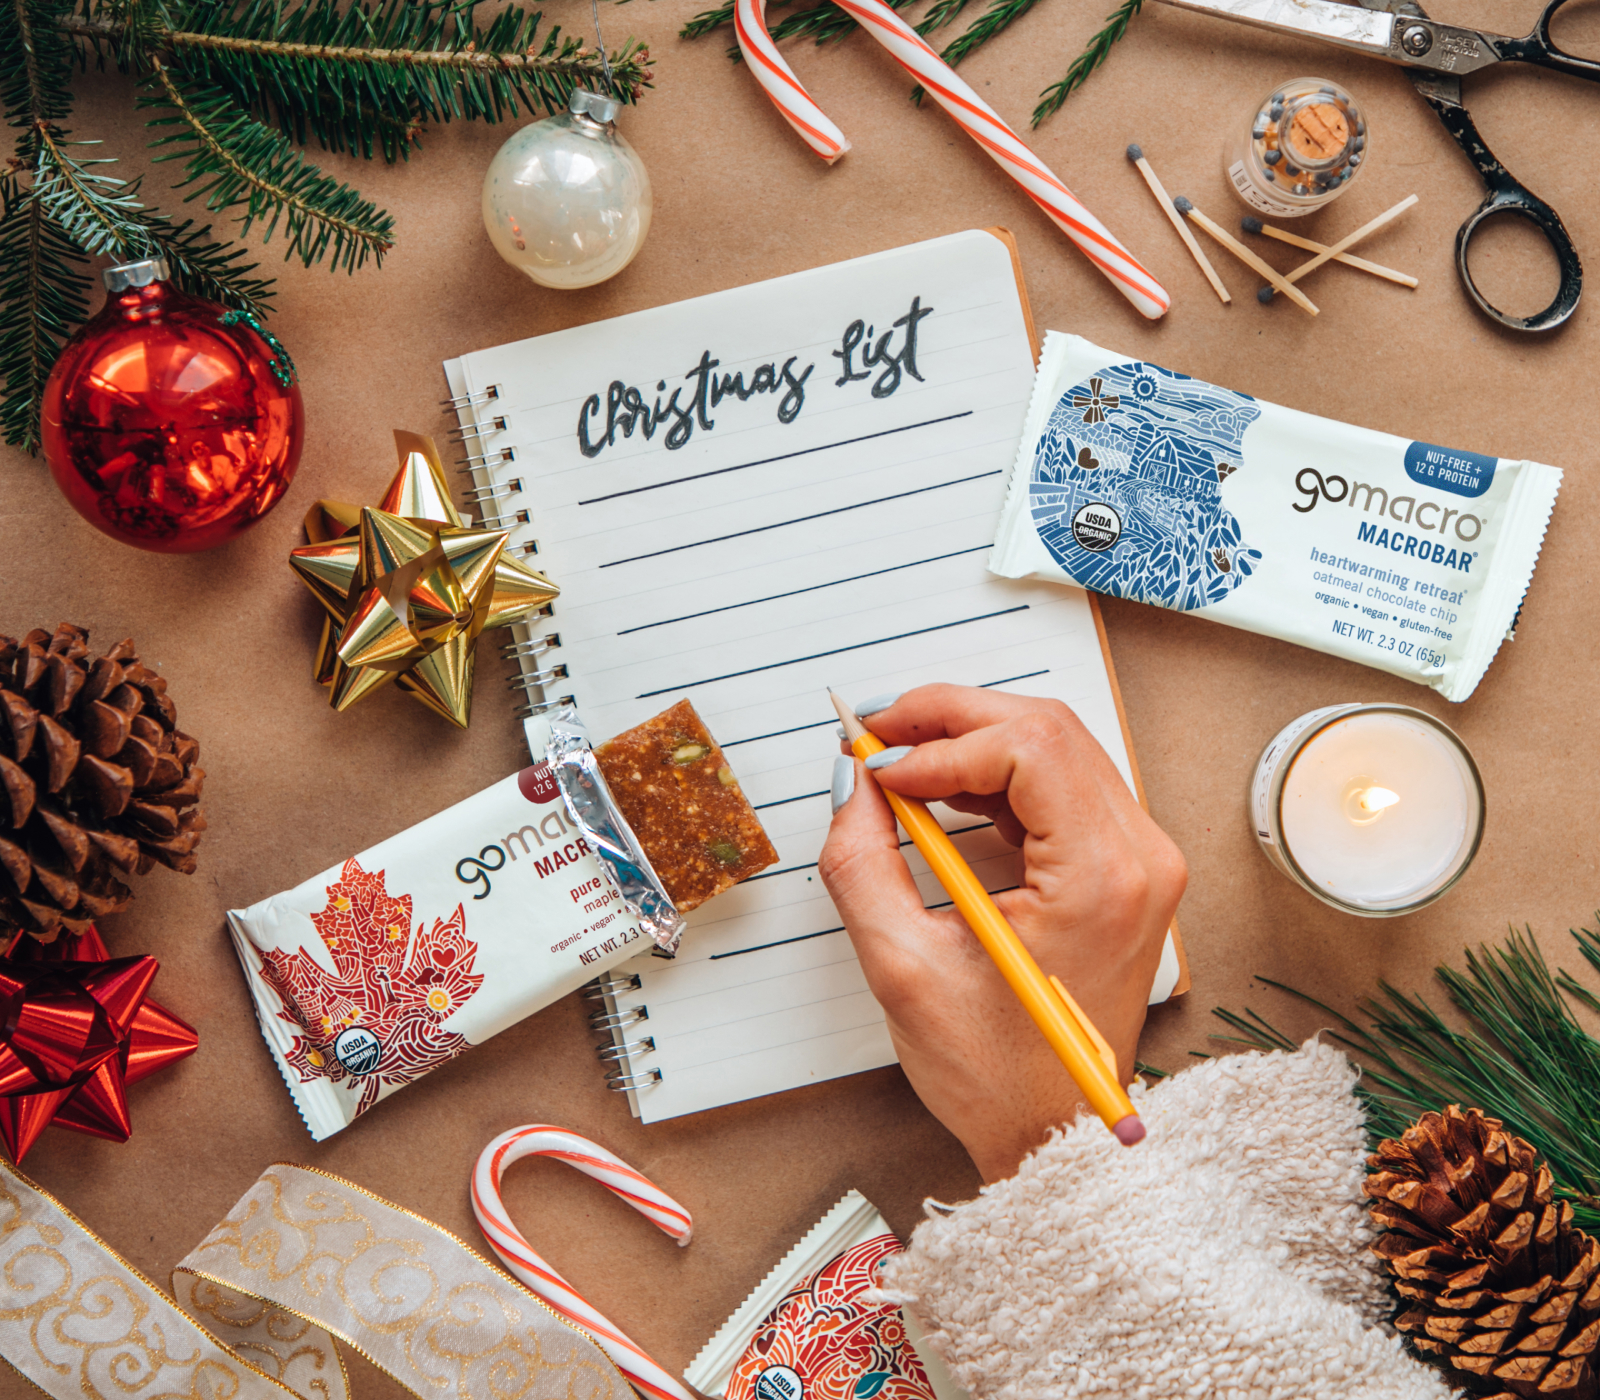 20 Sustainable Gifts for Eco-Friendly People during the Holidays